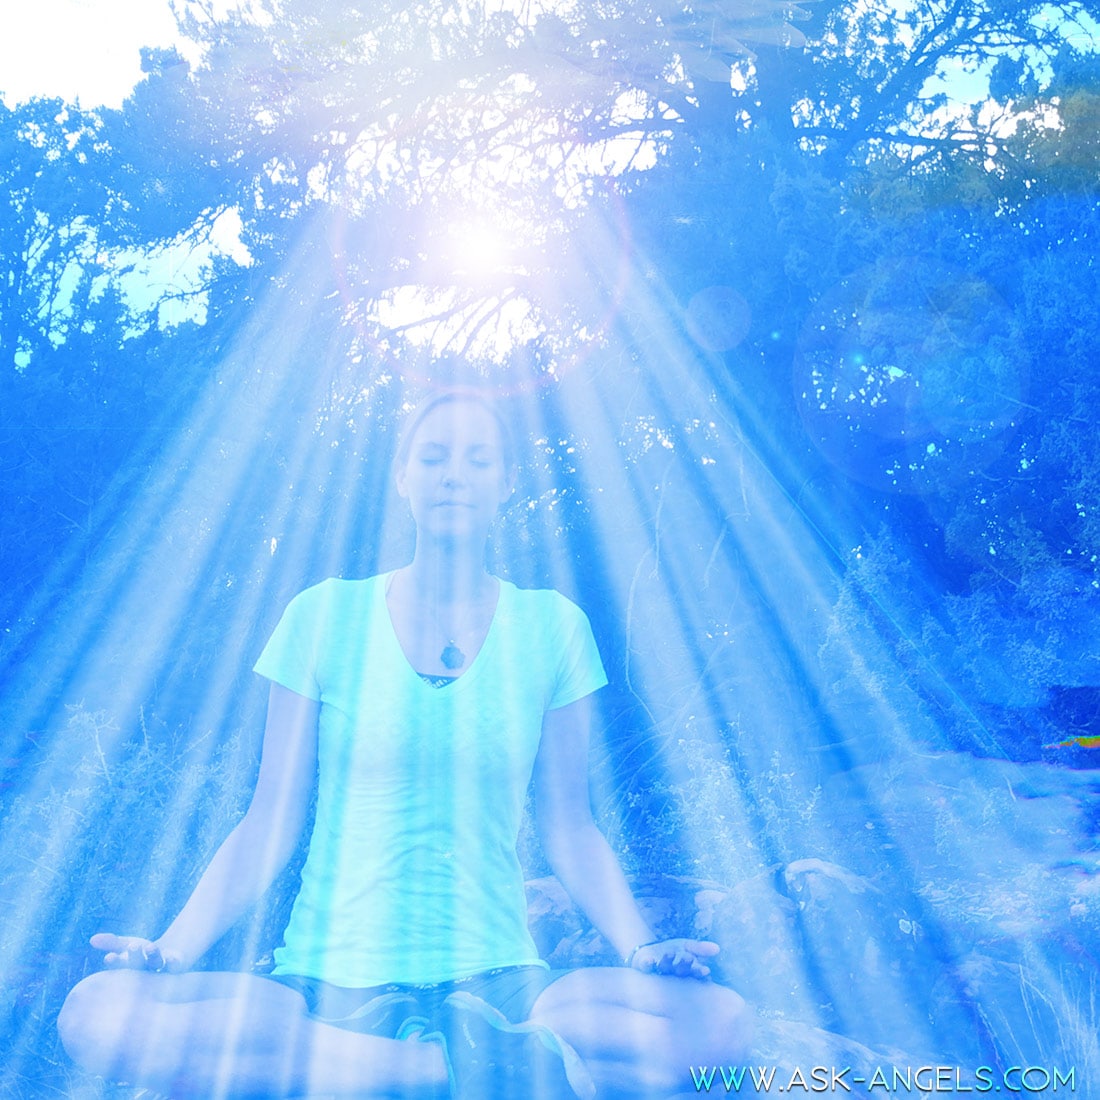 Waterfall Meditation with Divine Light